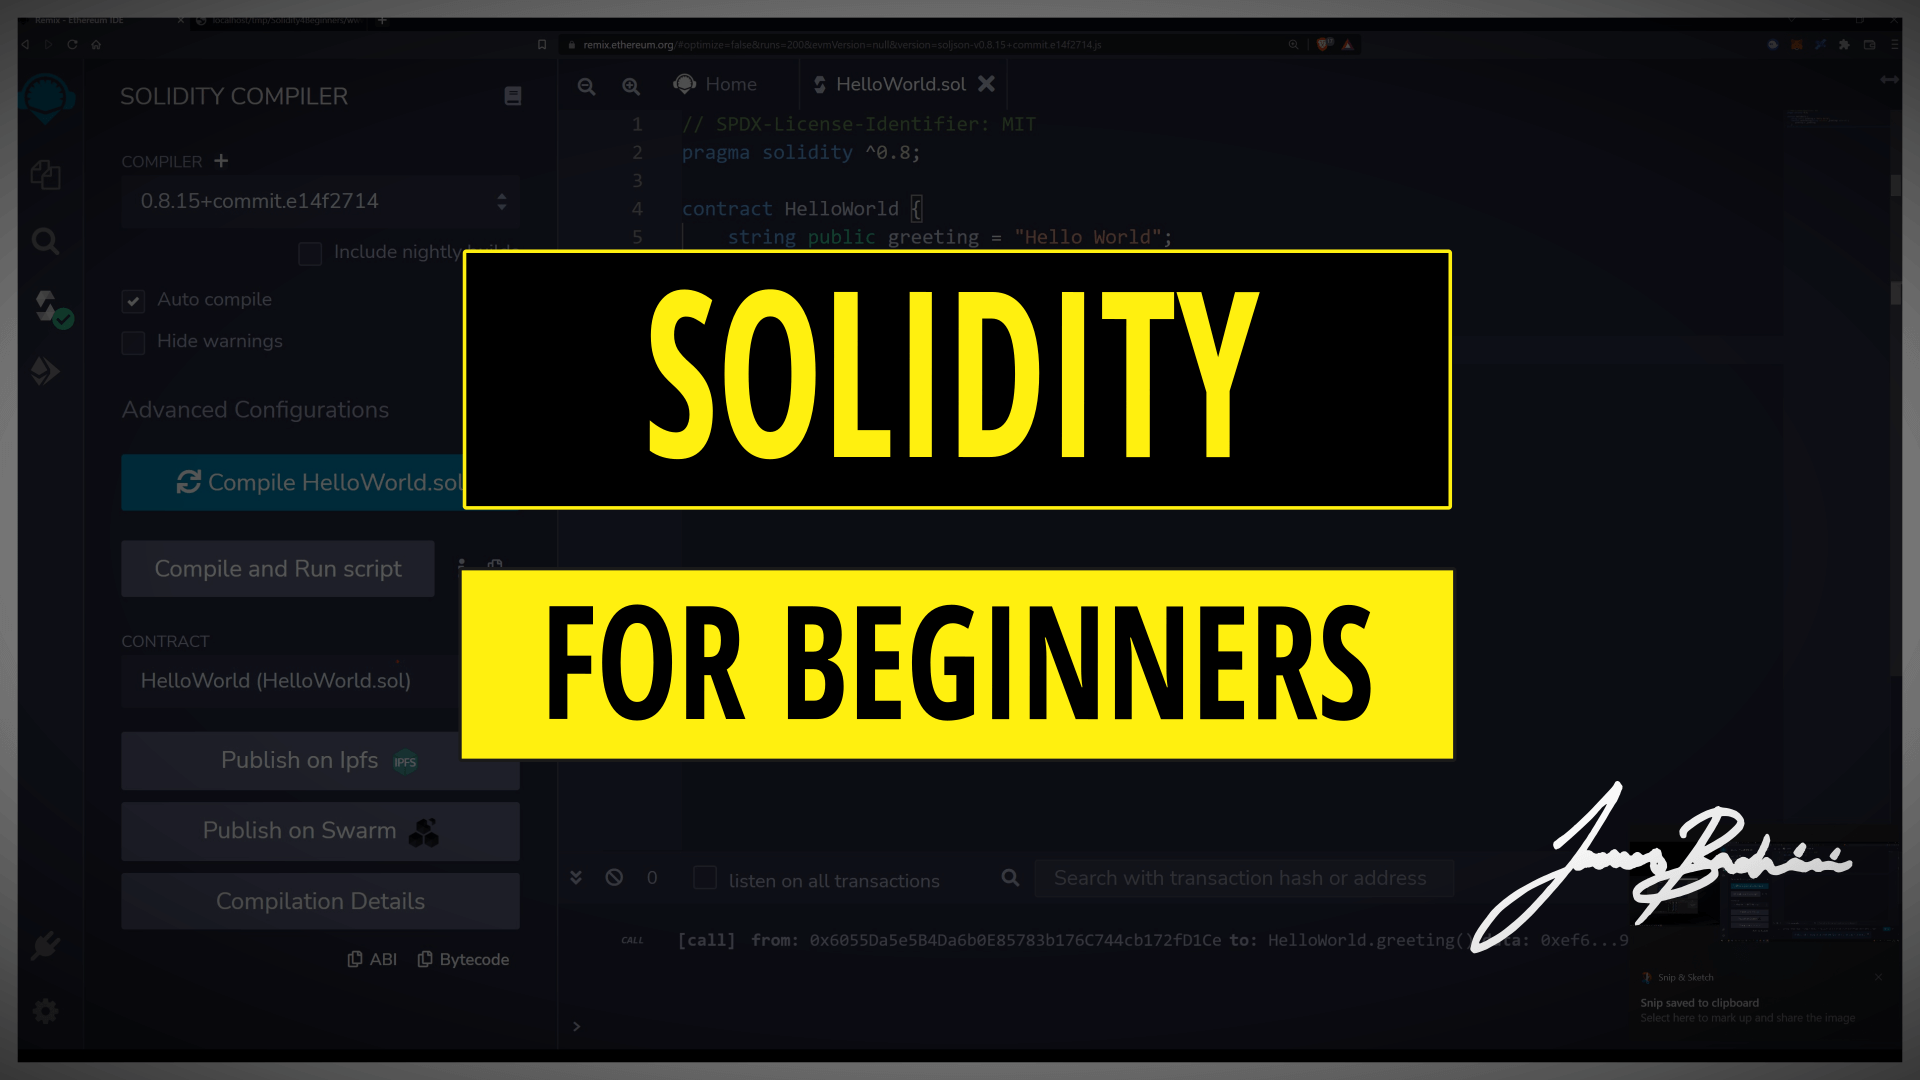 Solidity for Beginners